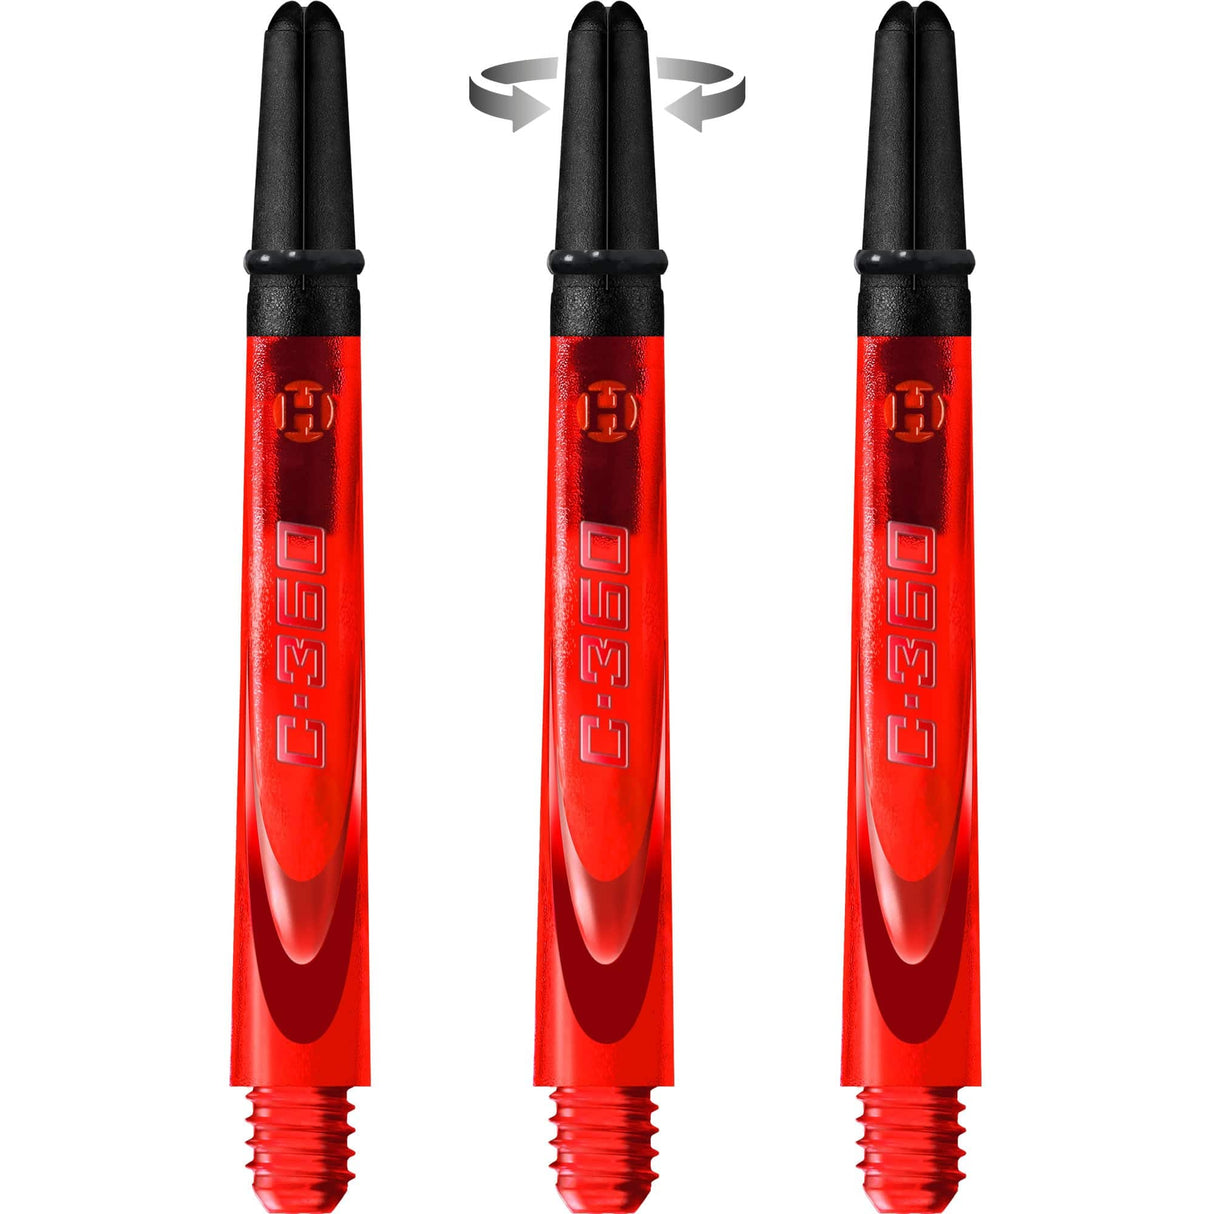 Harrows Carbon 360 Shafts - Polycarbonate Dart Stems with Carbon Top - Red Medium